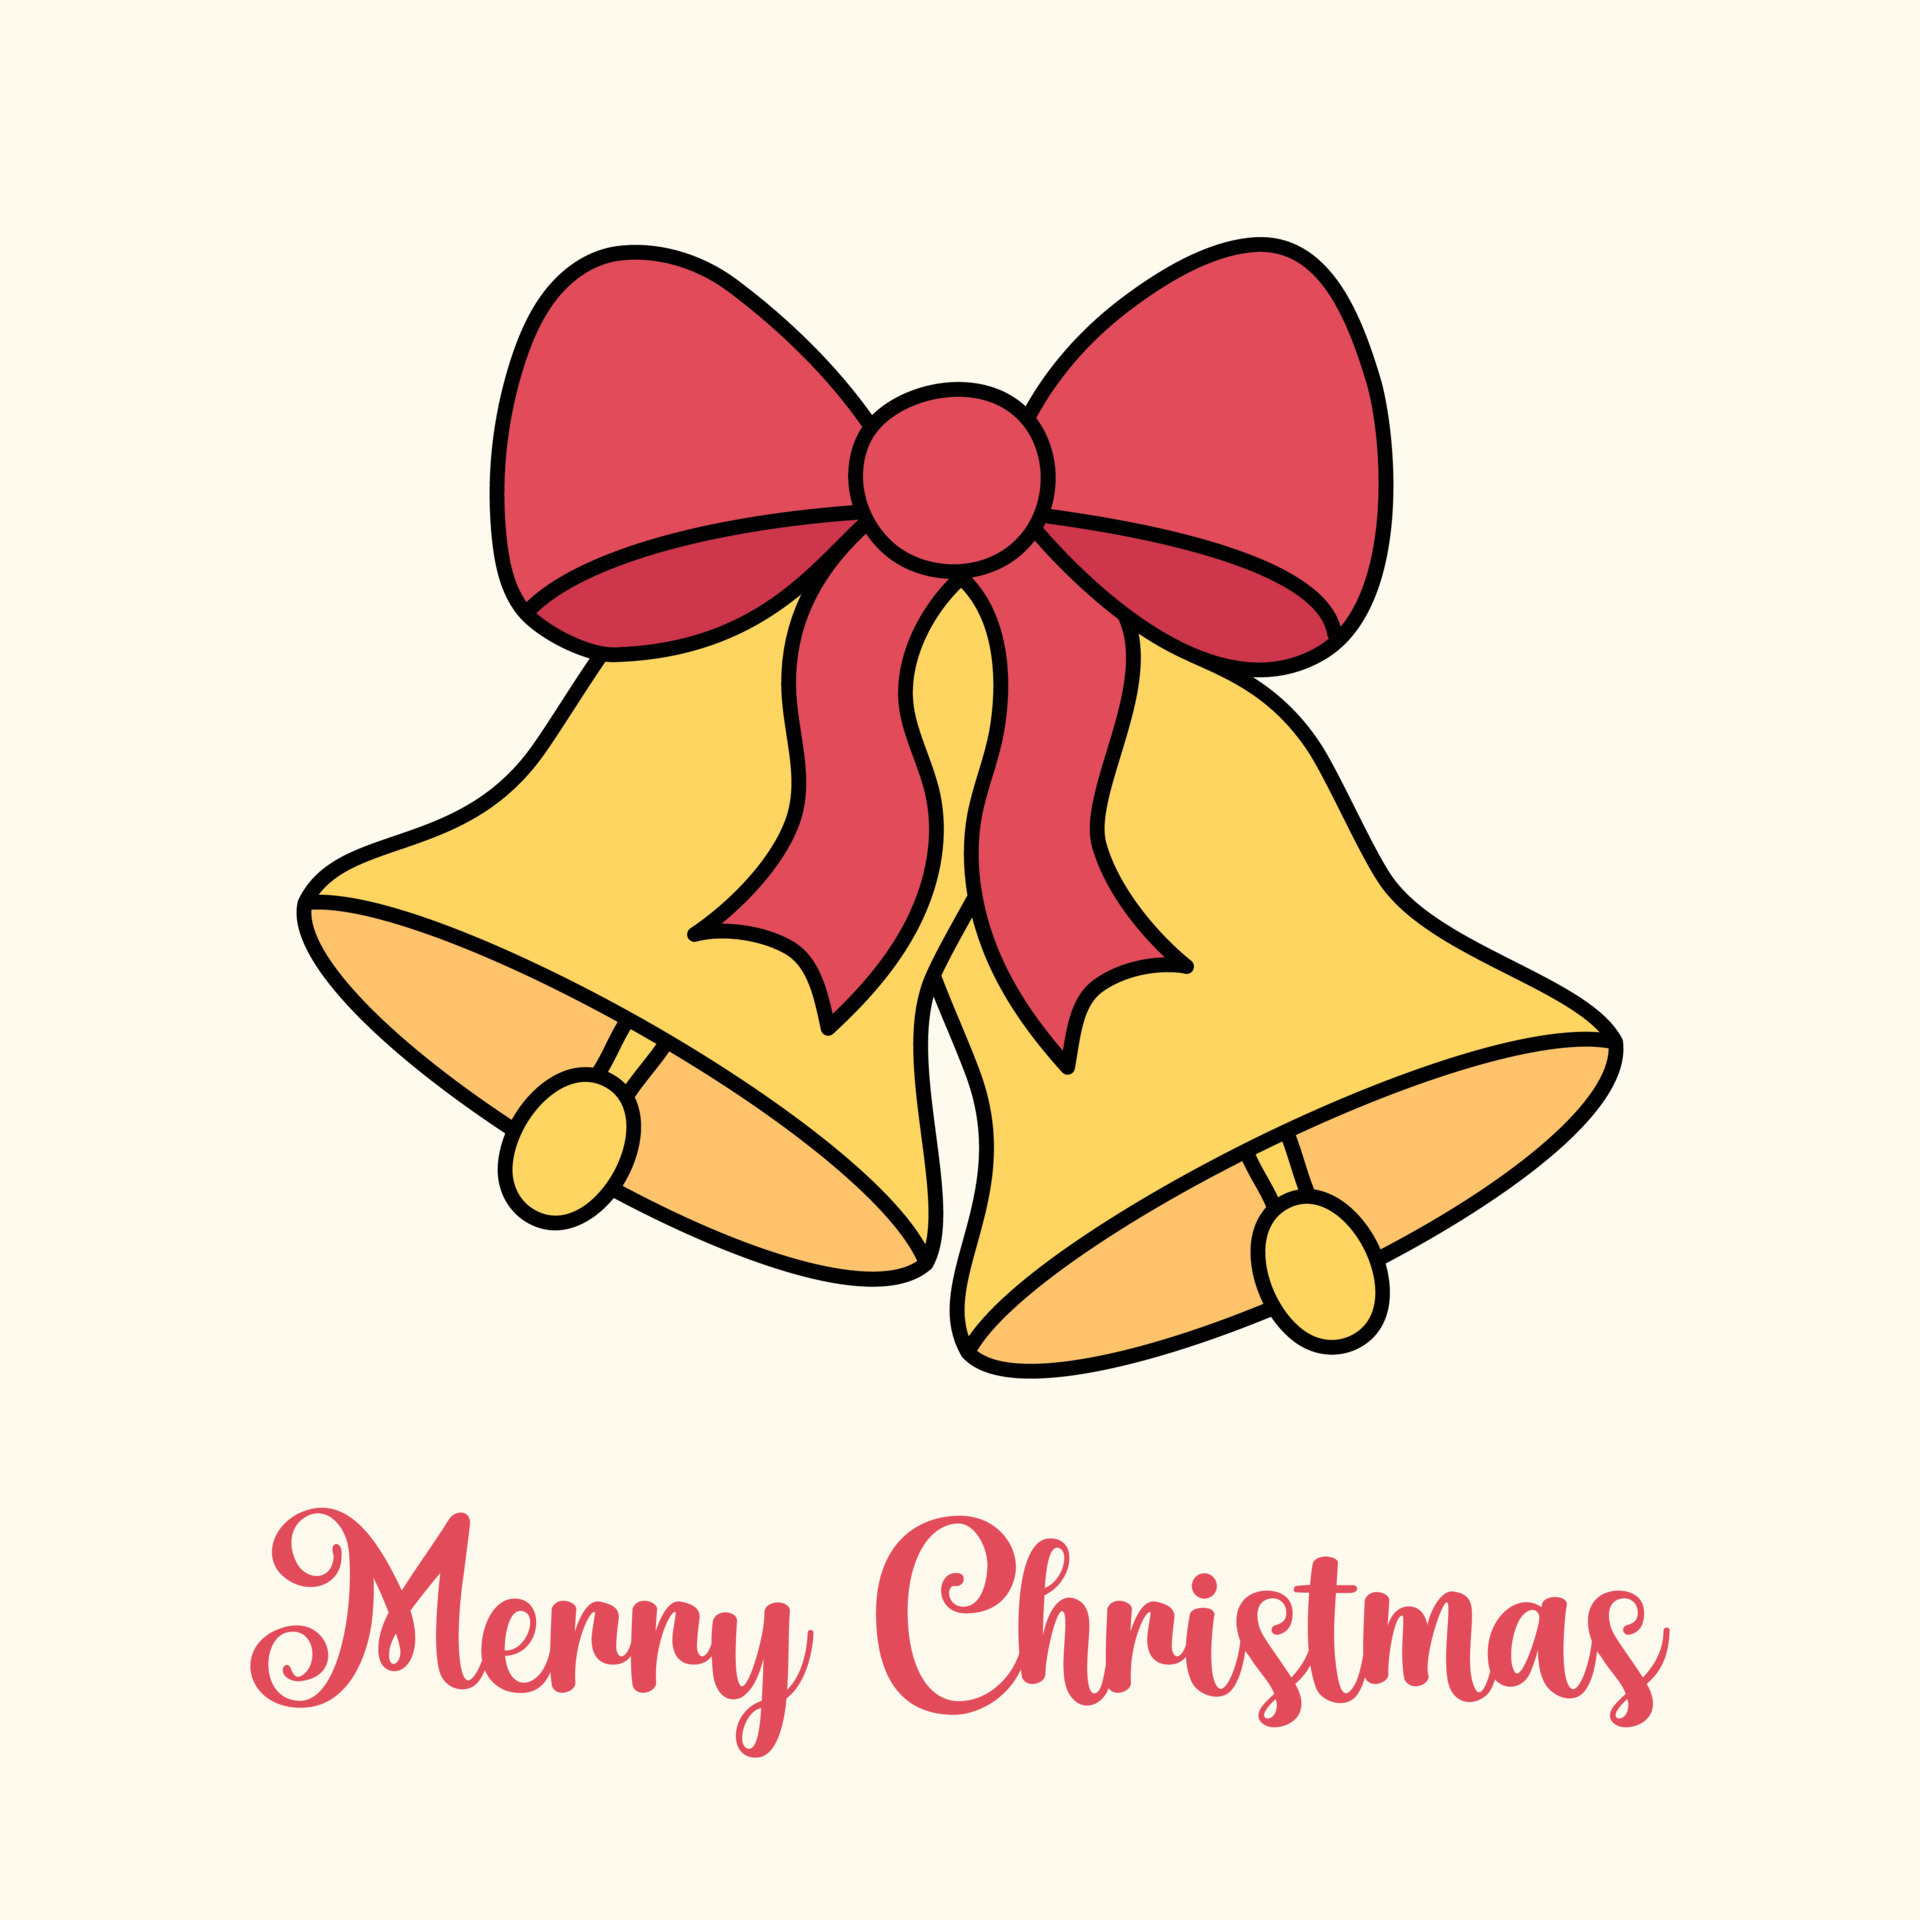 https://static.vecteezy.com/system/resources/previews/011/776/881/original/cute-merry-chrismas-greeting-card-with-golden-bells-and-bow-square-illustration-of-two-outline-jingle-bells-composition-of-christmas-symbol-and-vintage-text-vector.jpg